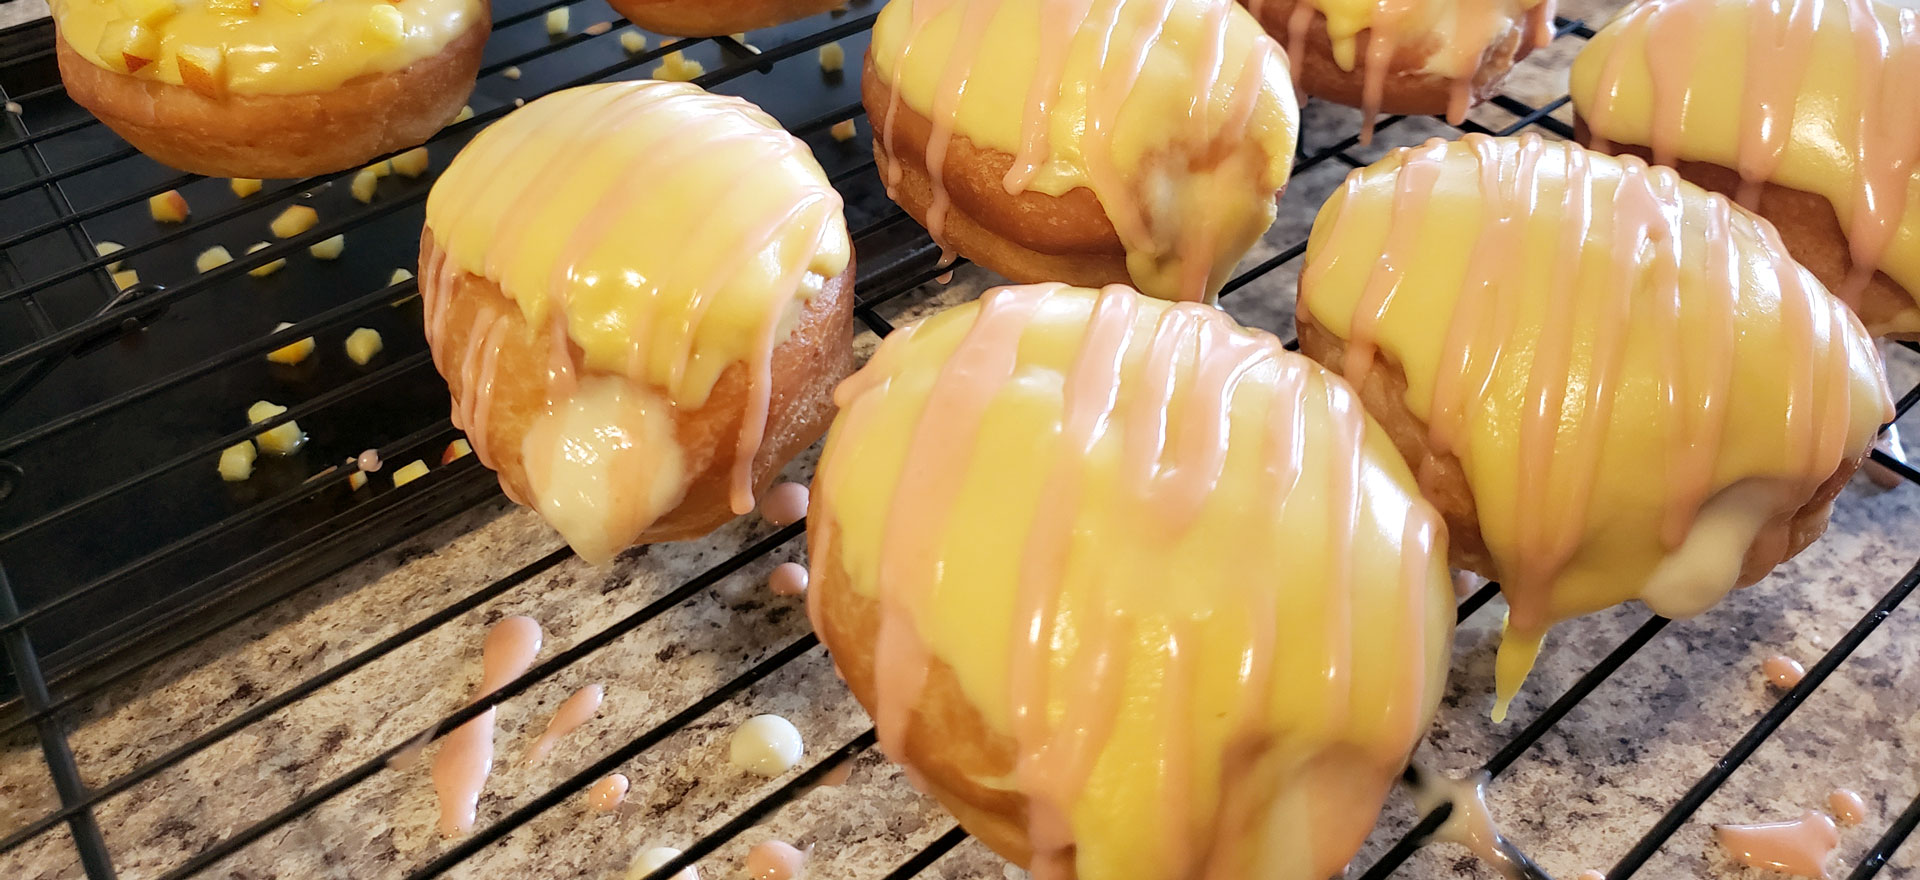 Pastry cream donut with cream and pink frosting